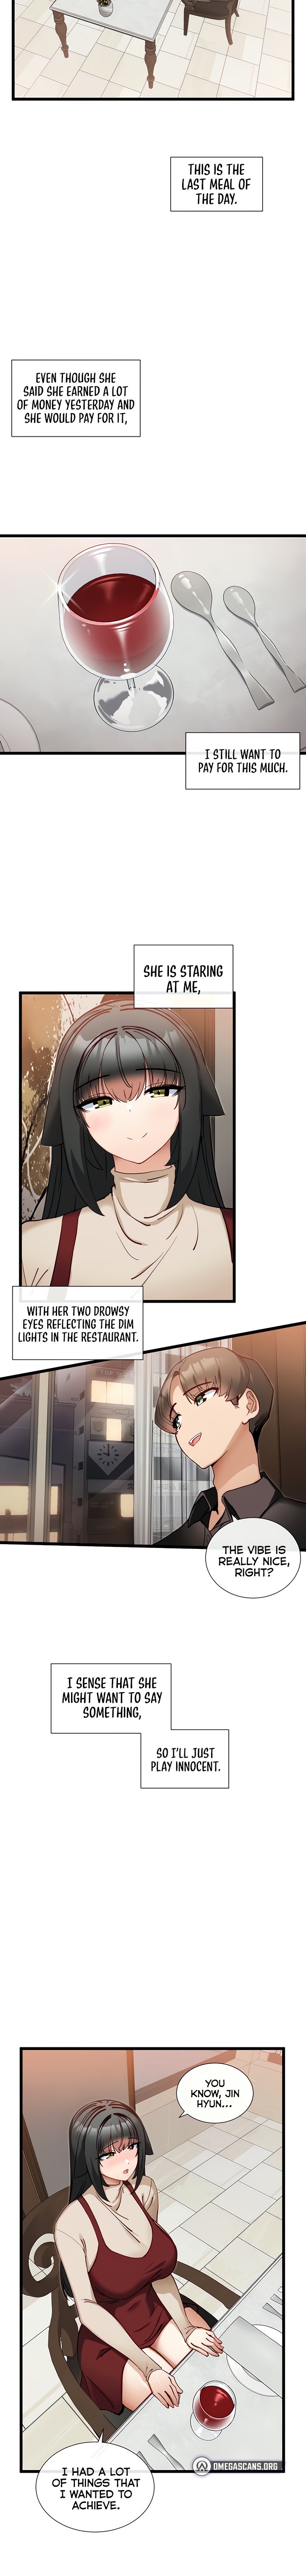 Heroine App - Chapter 25 Page 10